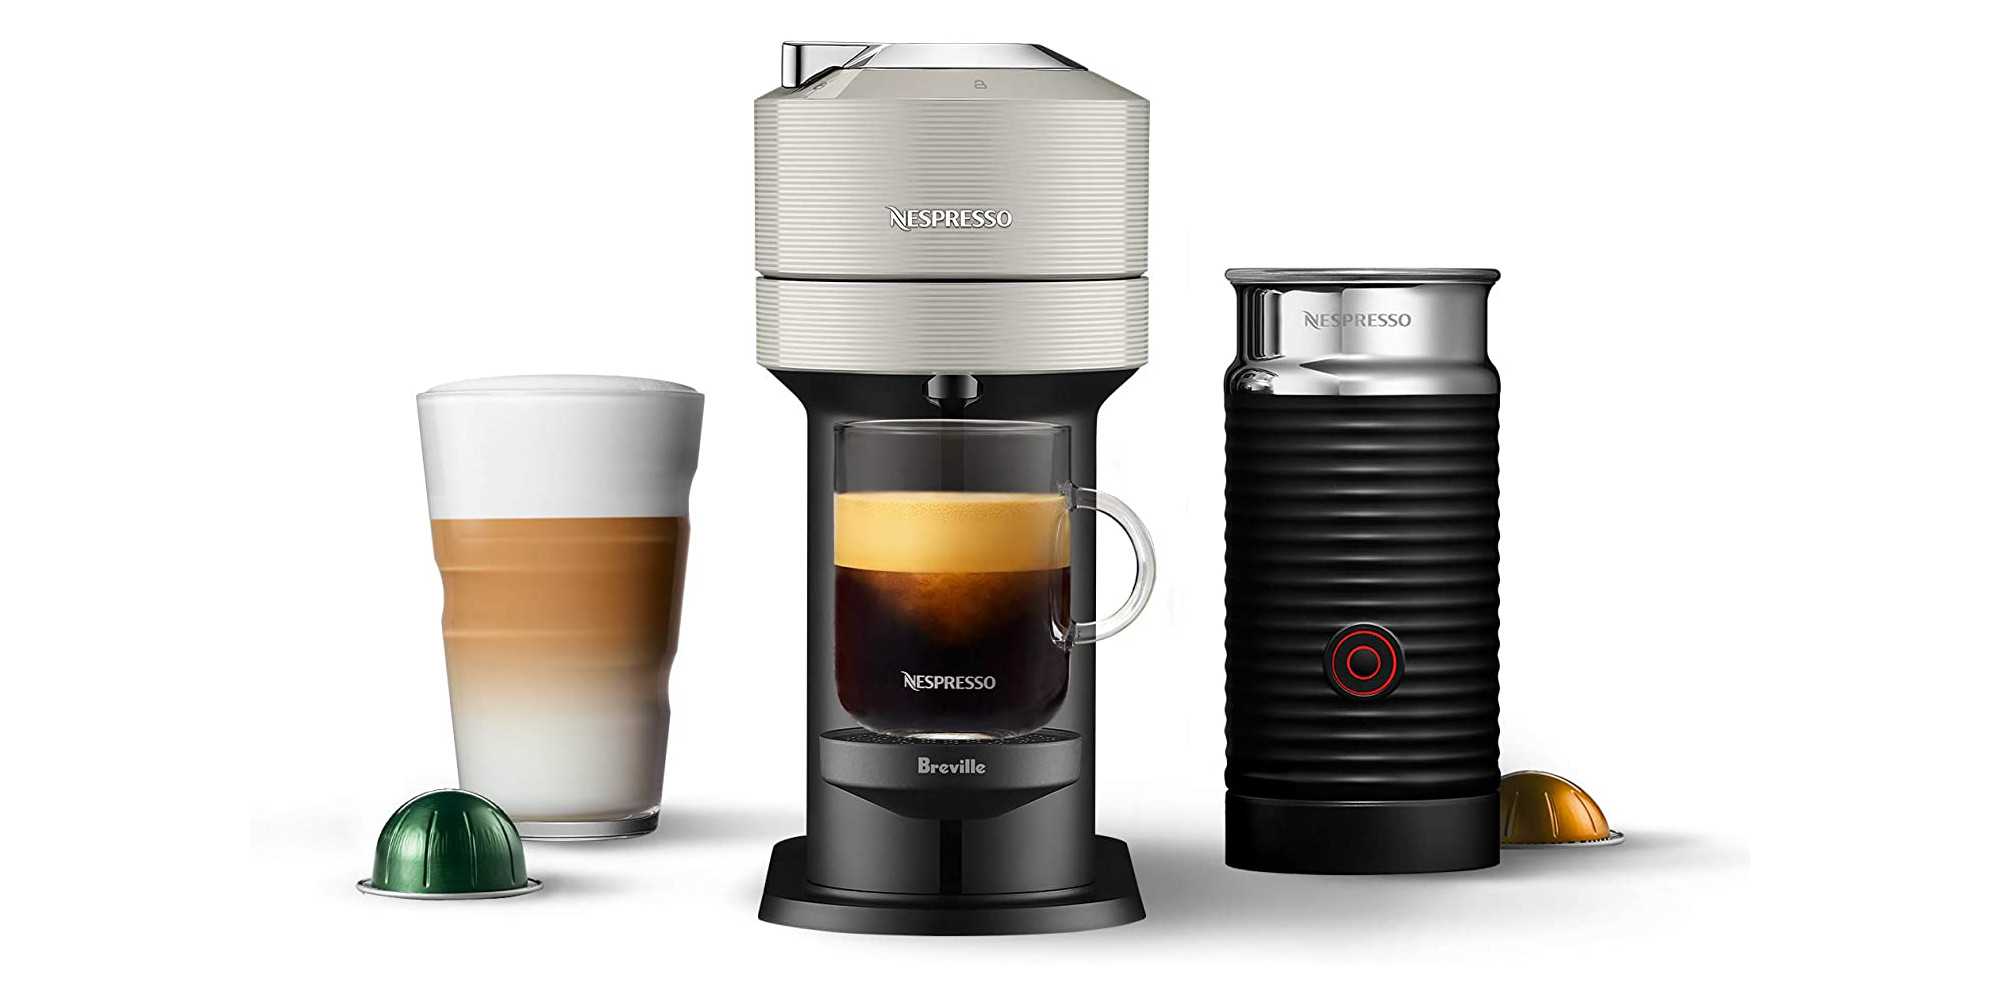 Best prices of 2021 now live on Nespresso Vertuo Espresso Machines from $120 less - 9to5Toys